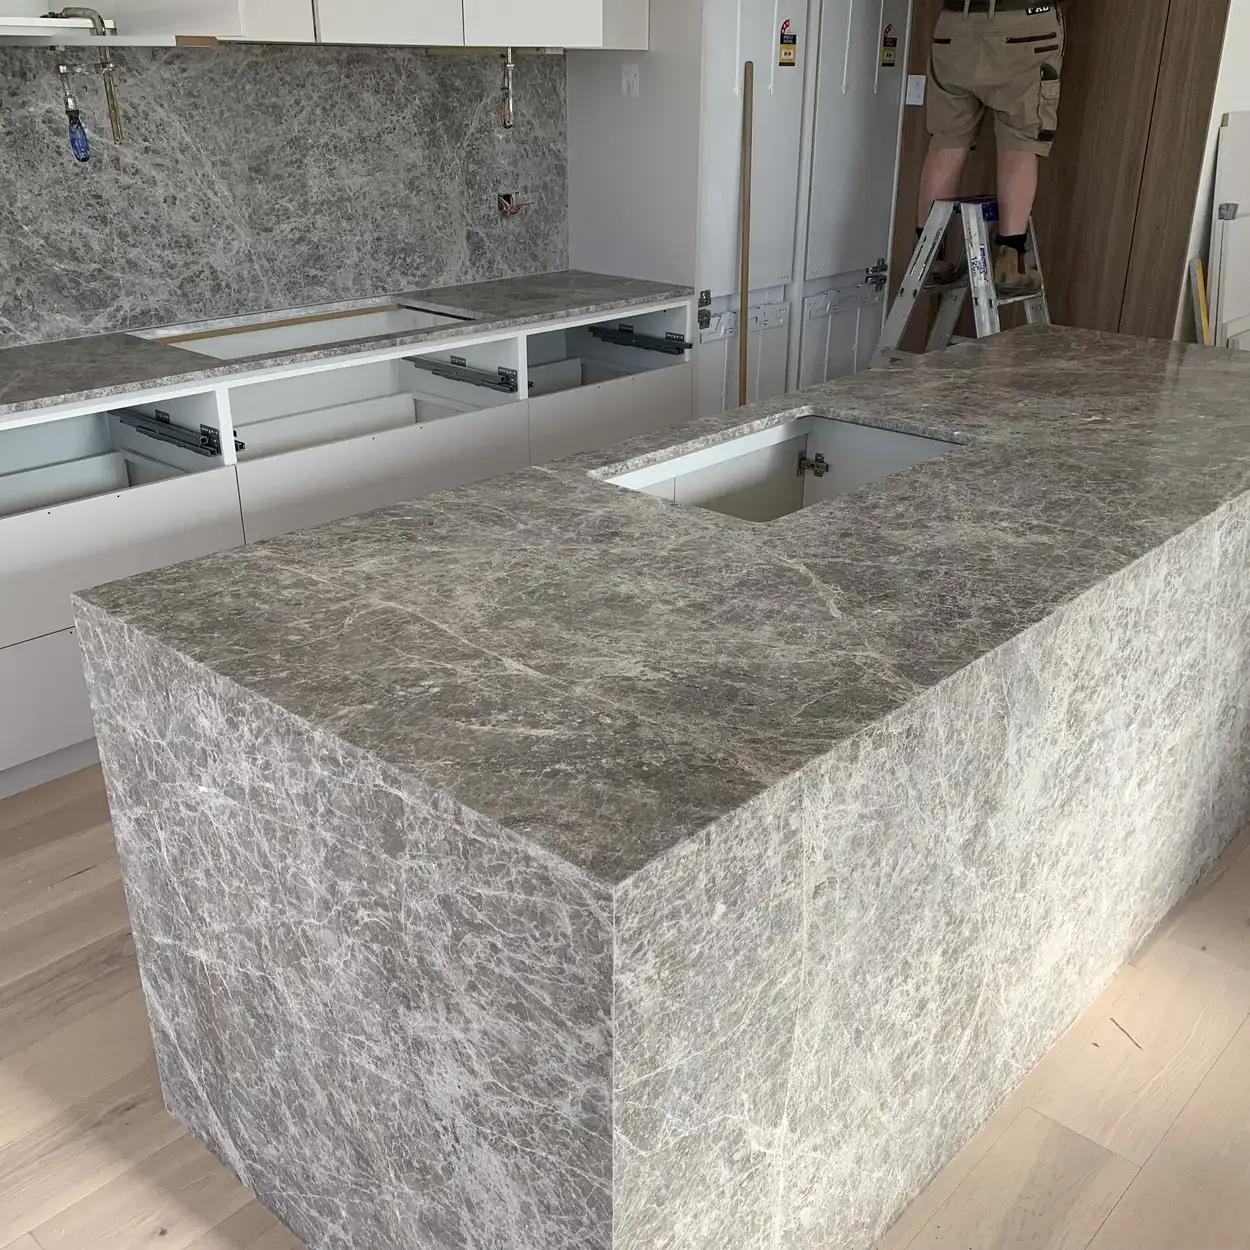 Image of a kitchen or bathroom with granite, marble or engineered stone. For demonstration purposes only.